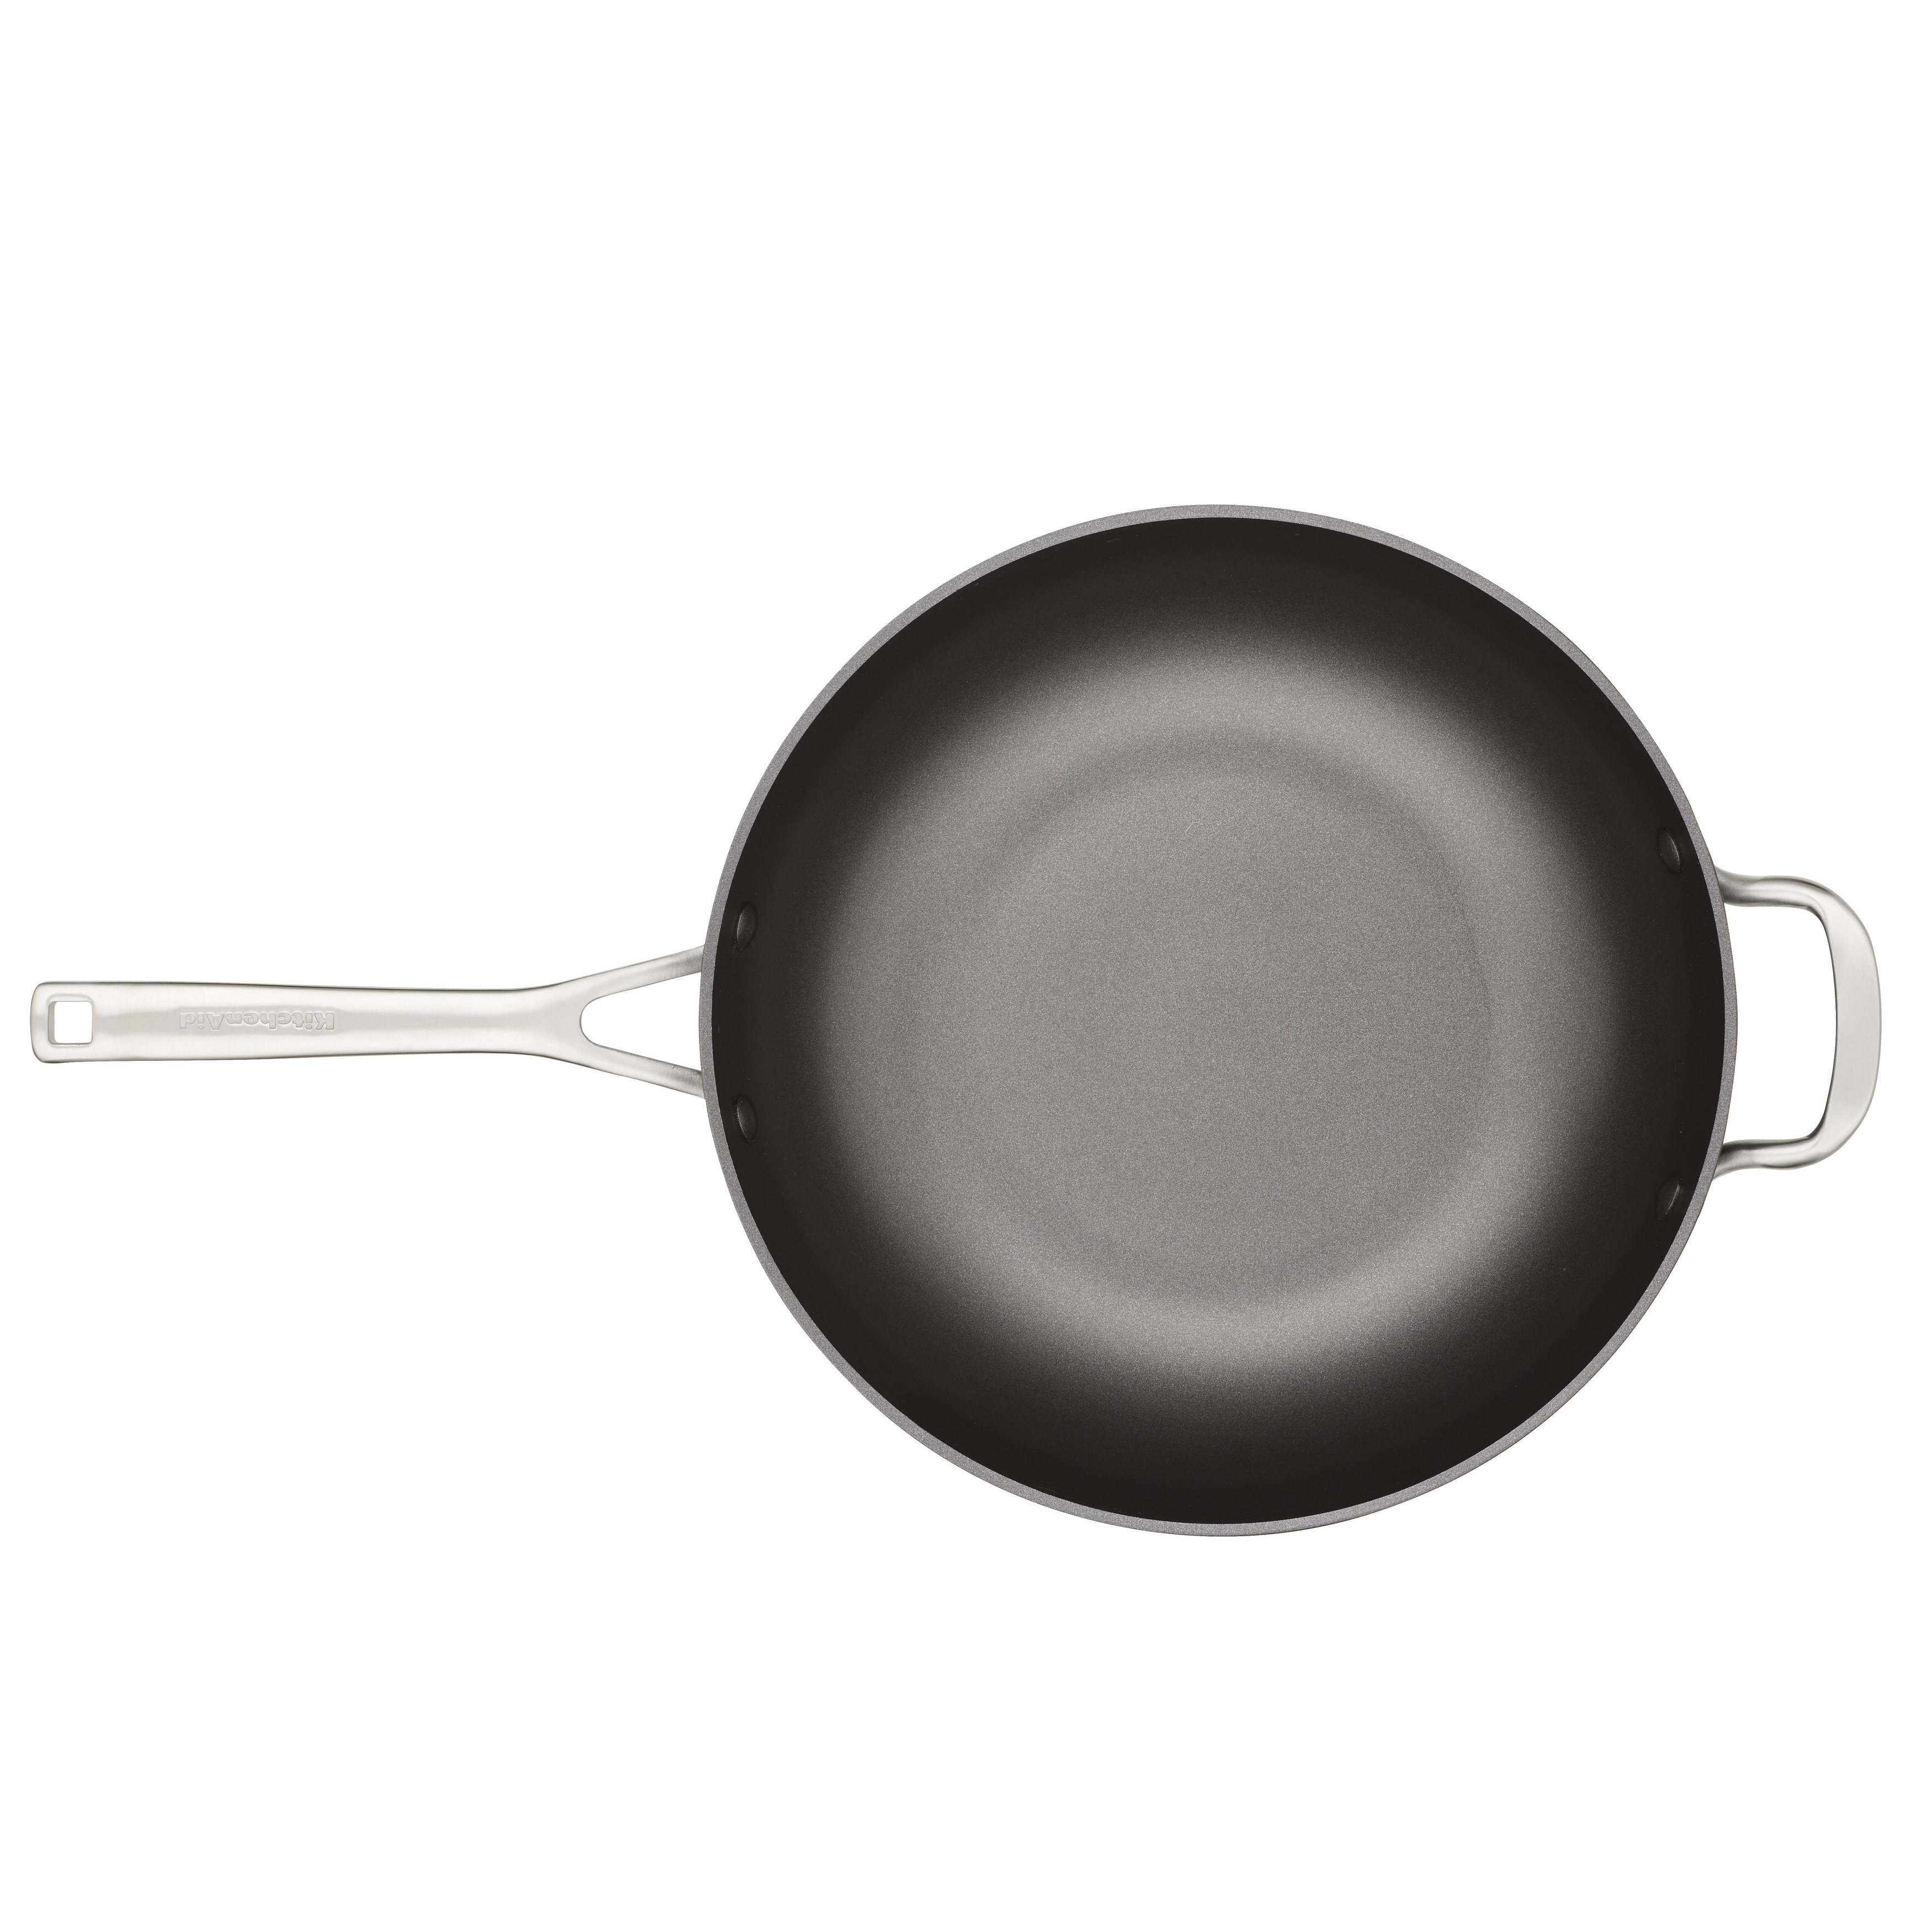 https://ak1.ostkcdn.com/images/products/is/images/direct/802bf72100d33f938399b7721a737d3464613b5c/KitchenAid-Hard-Anodized-Induction-Nonstick-Stir-Fry-Pan---Wok-with-Helper-Handle%2C-12.25-Inch%2C-Matte-Black.jpg